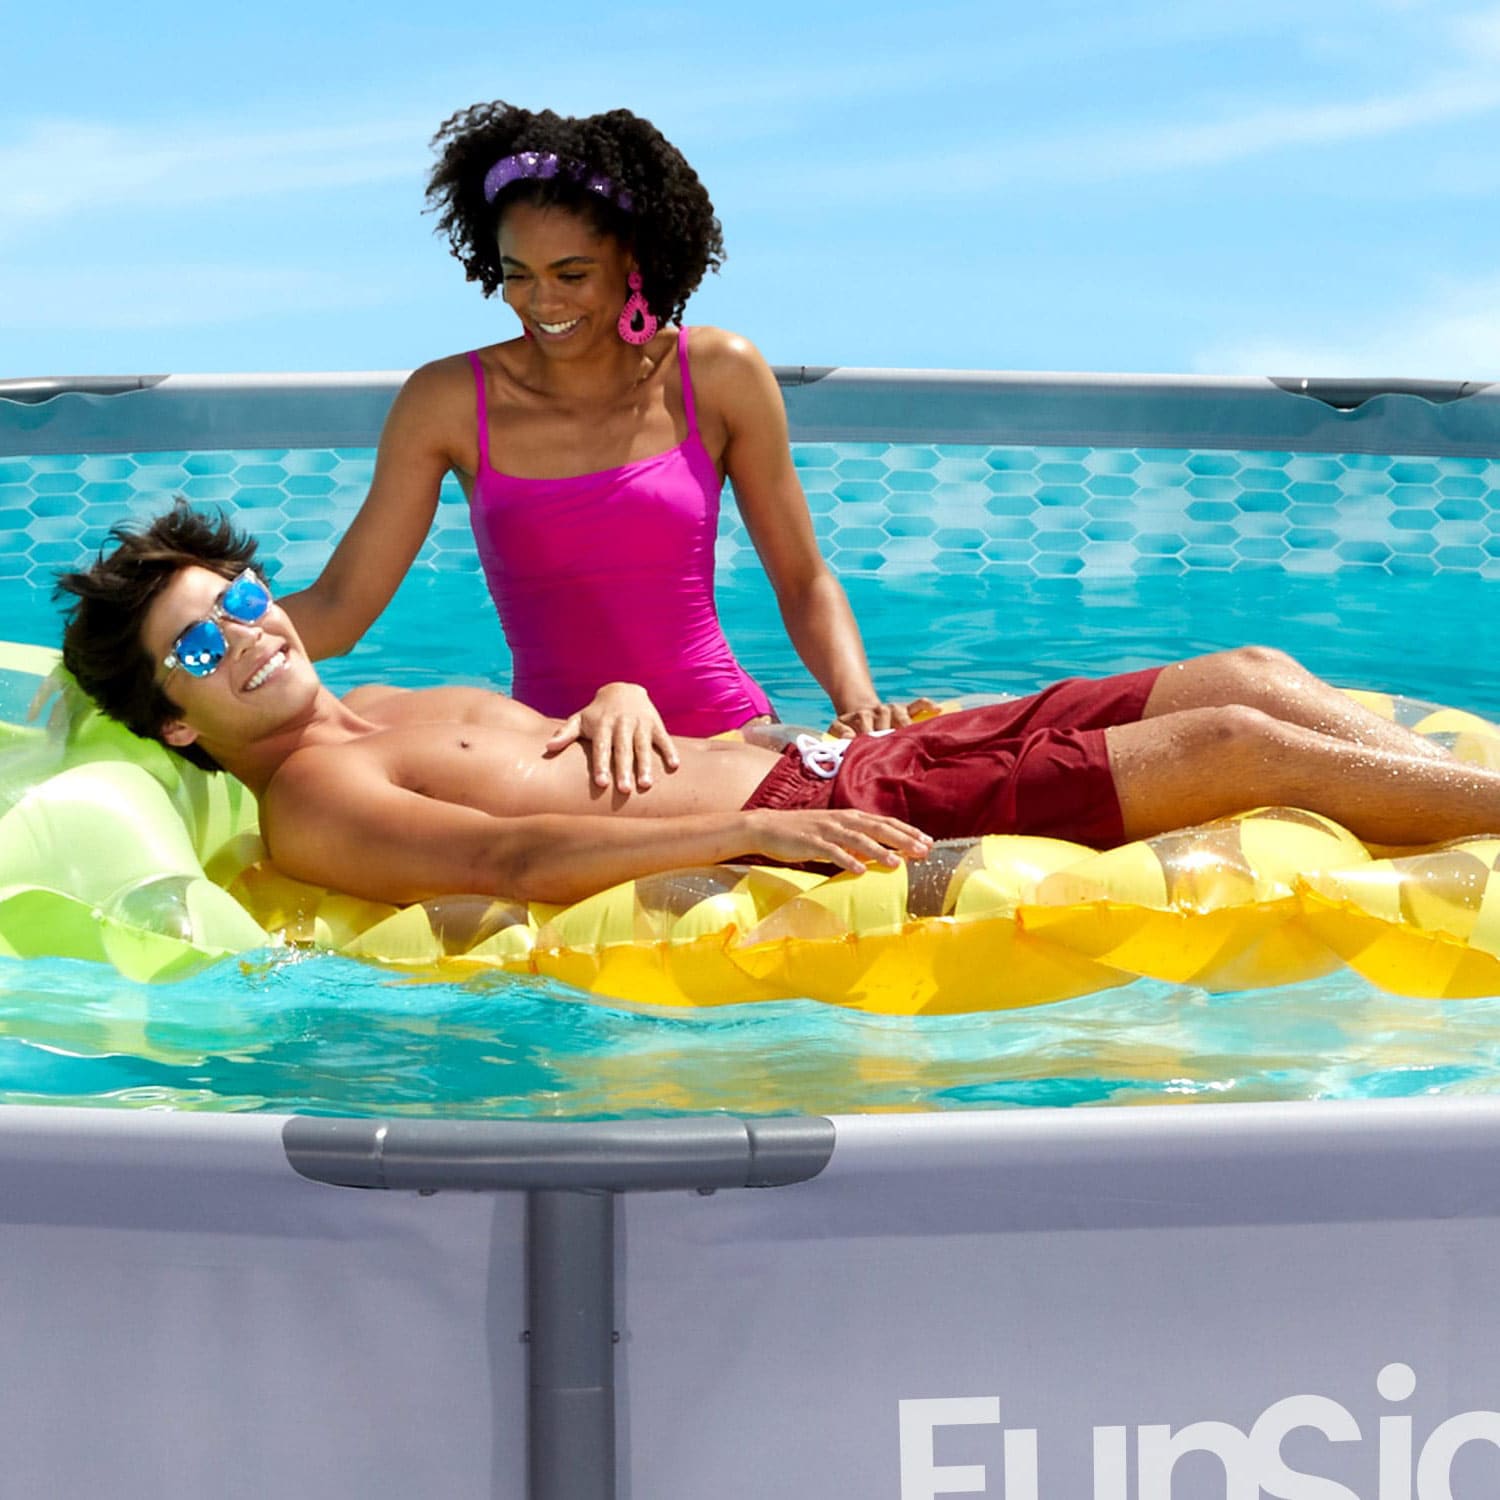 Funsicle 14 ft Oasis Pool with two people close up view